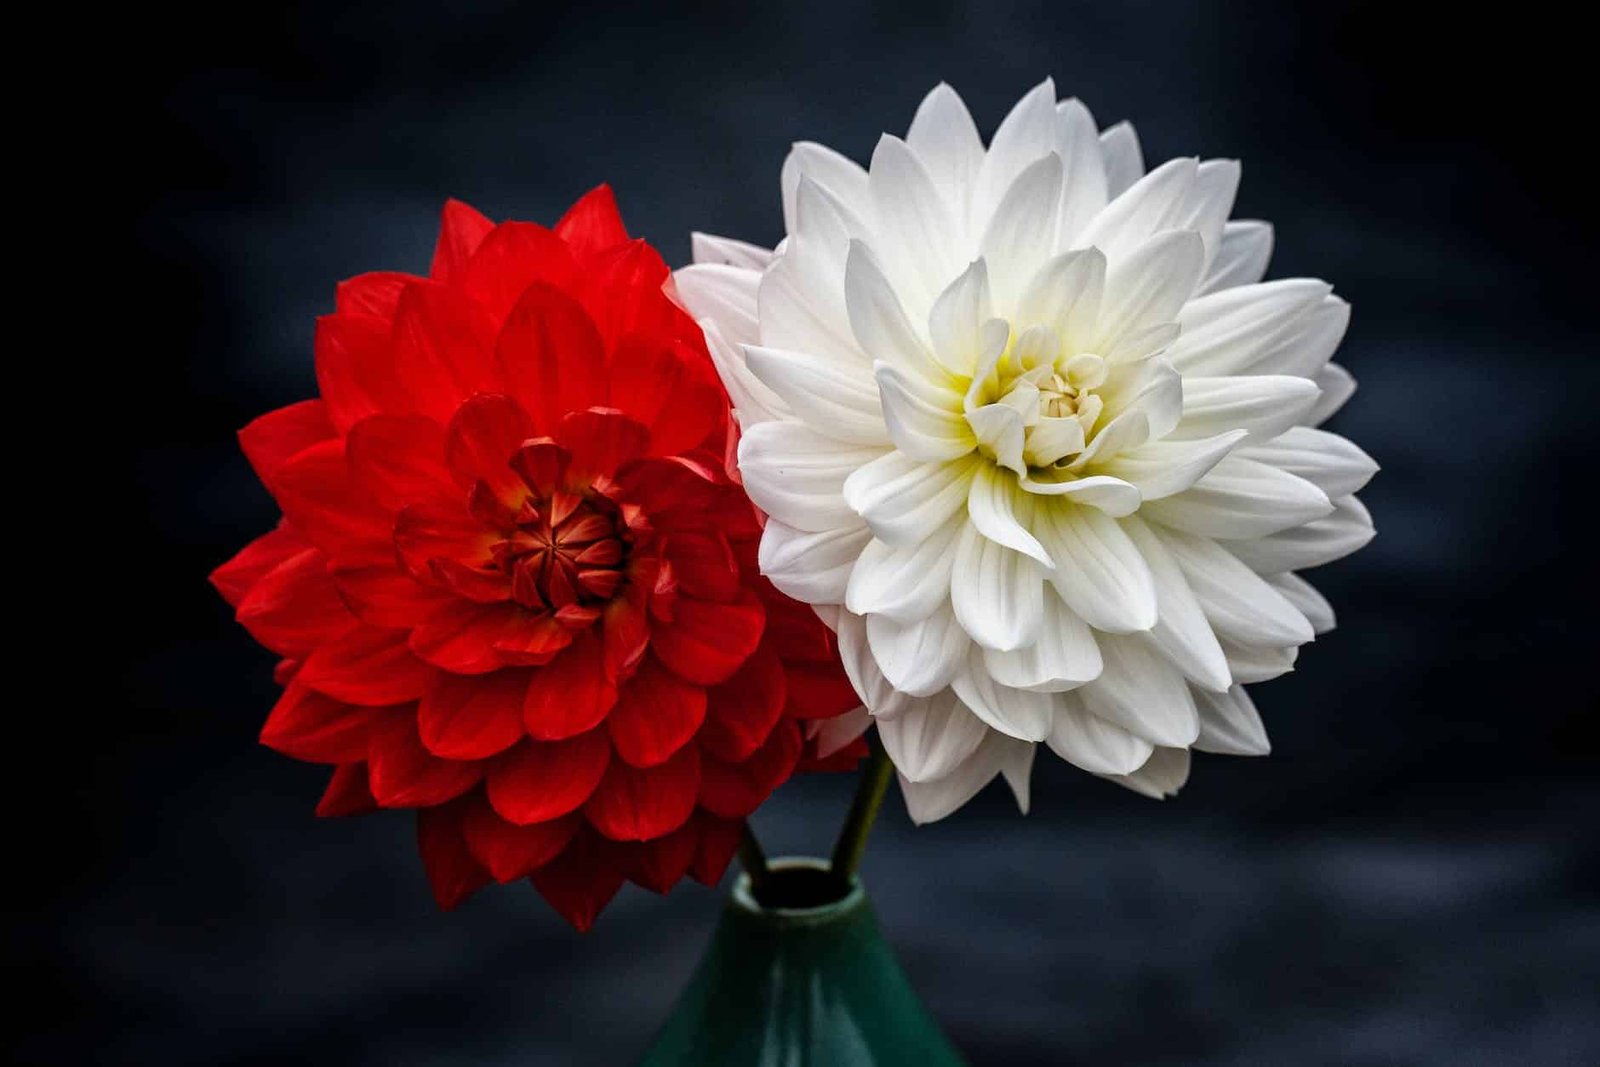 photo of red and white petaled flowers